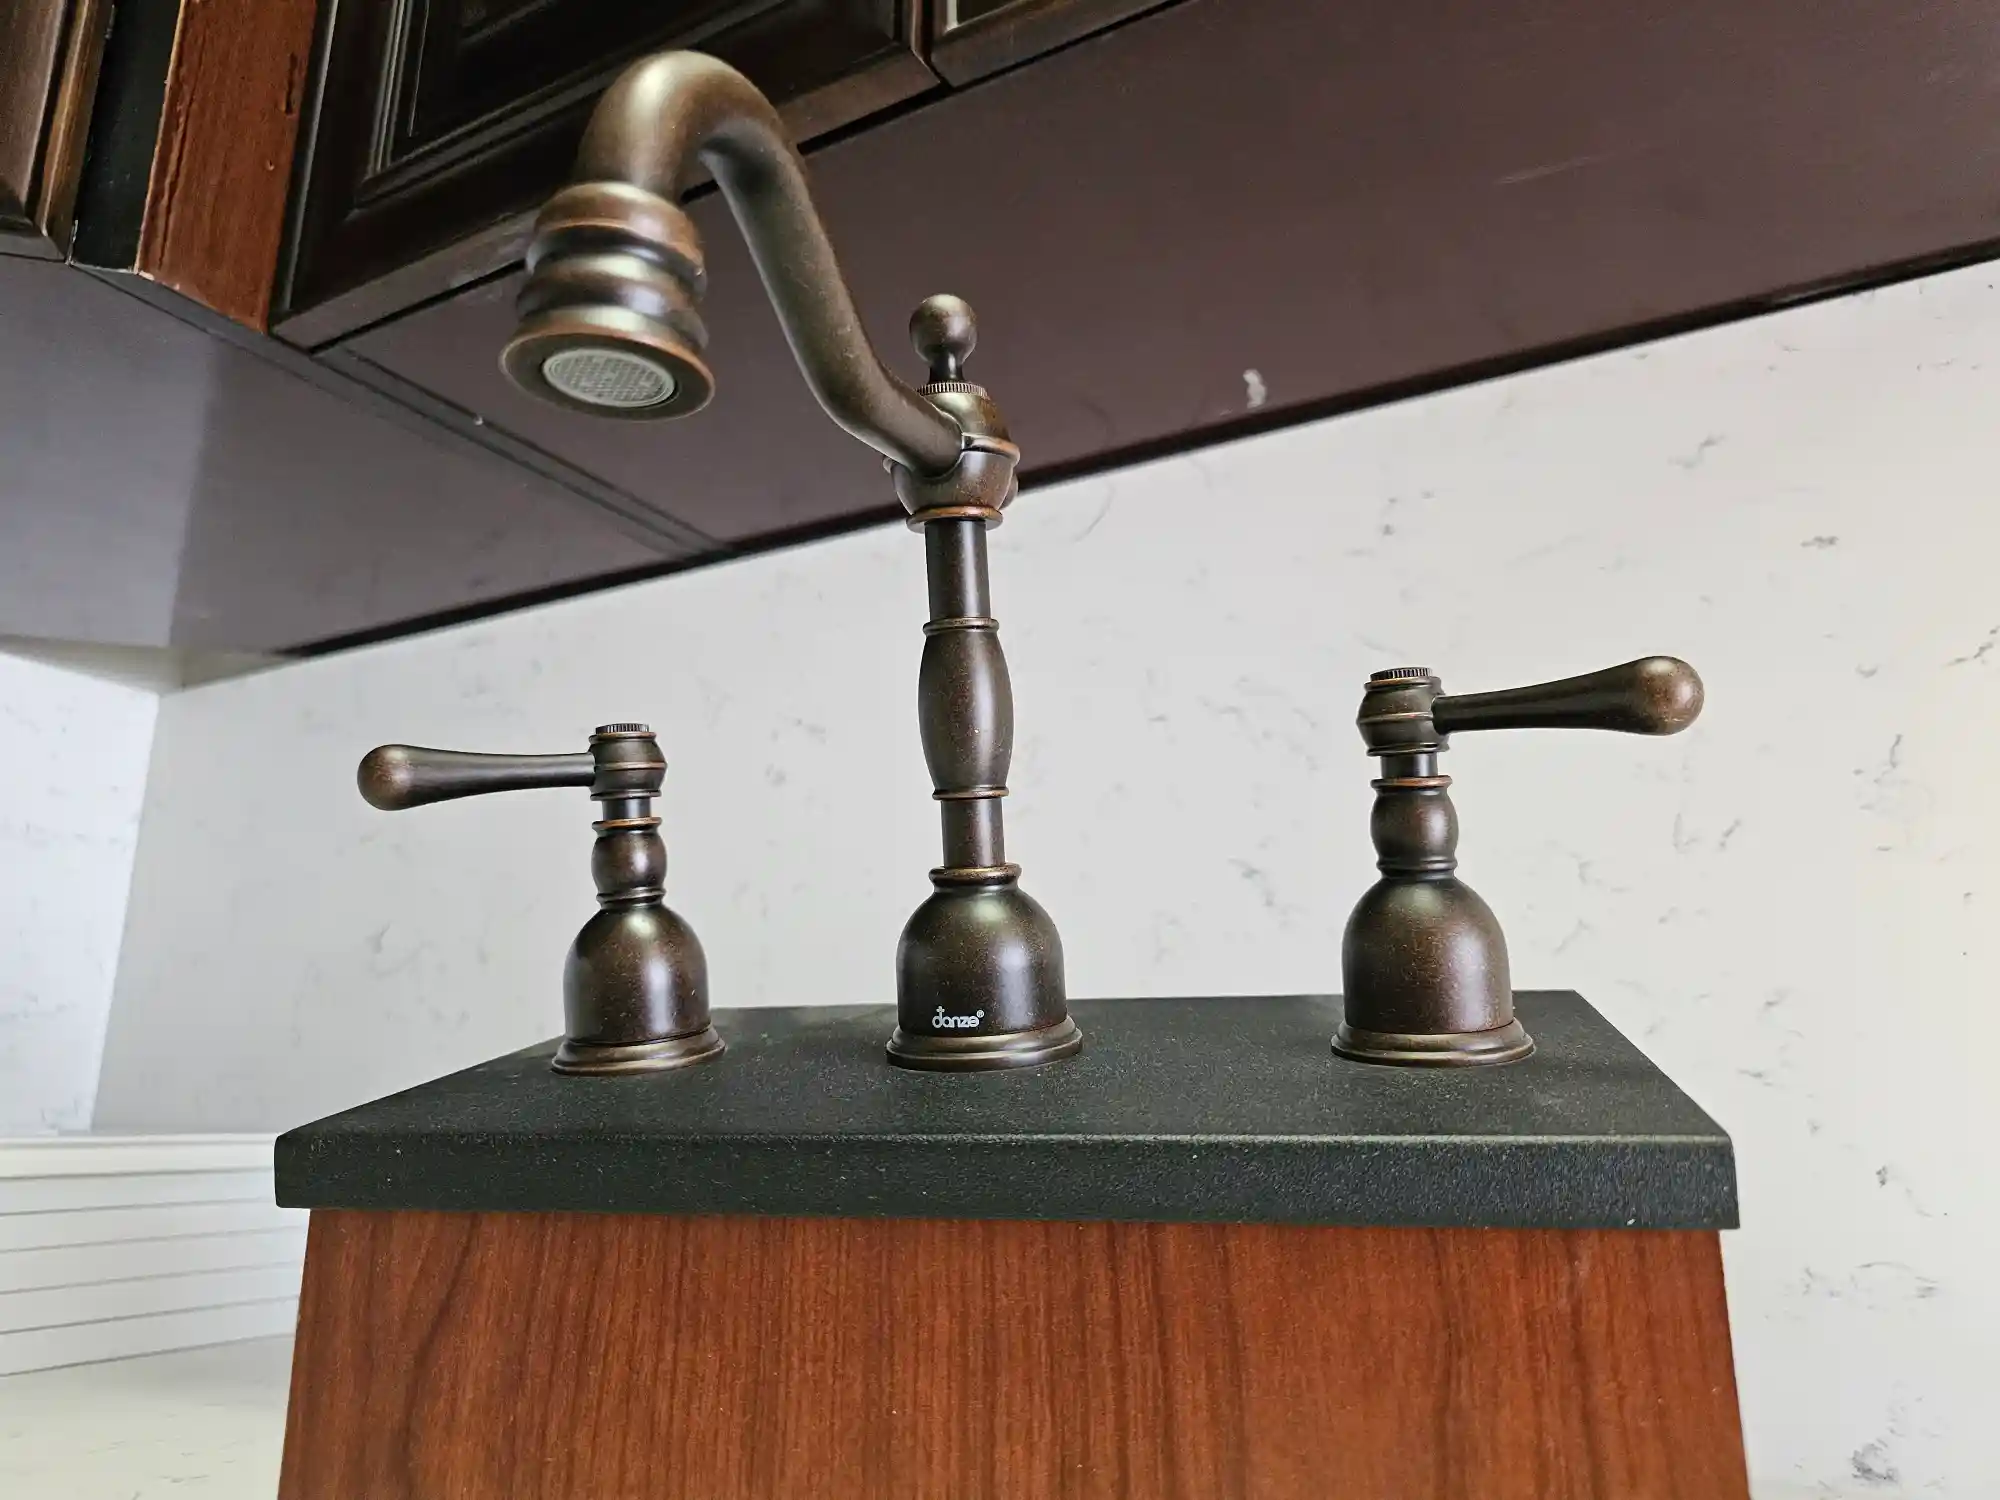 Bronze handles and faucets.